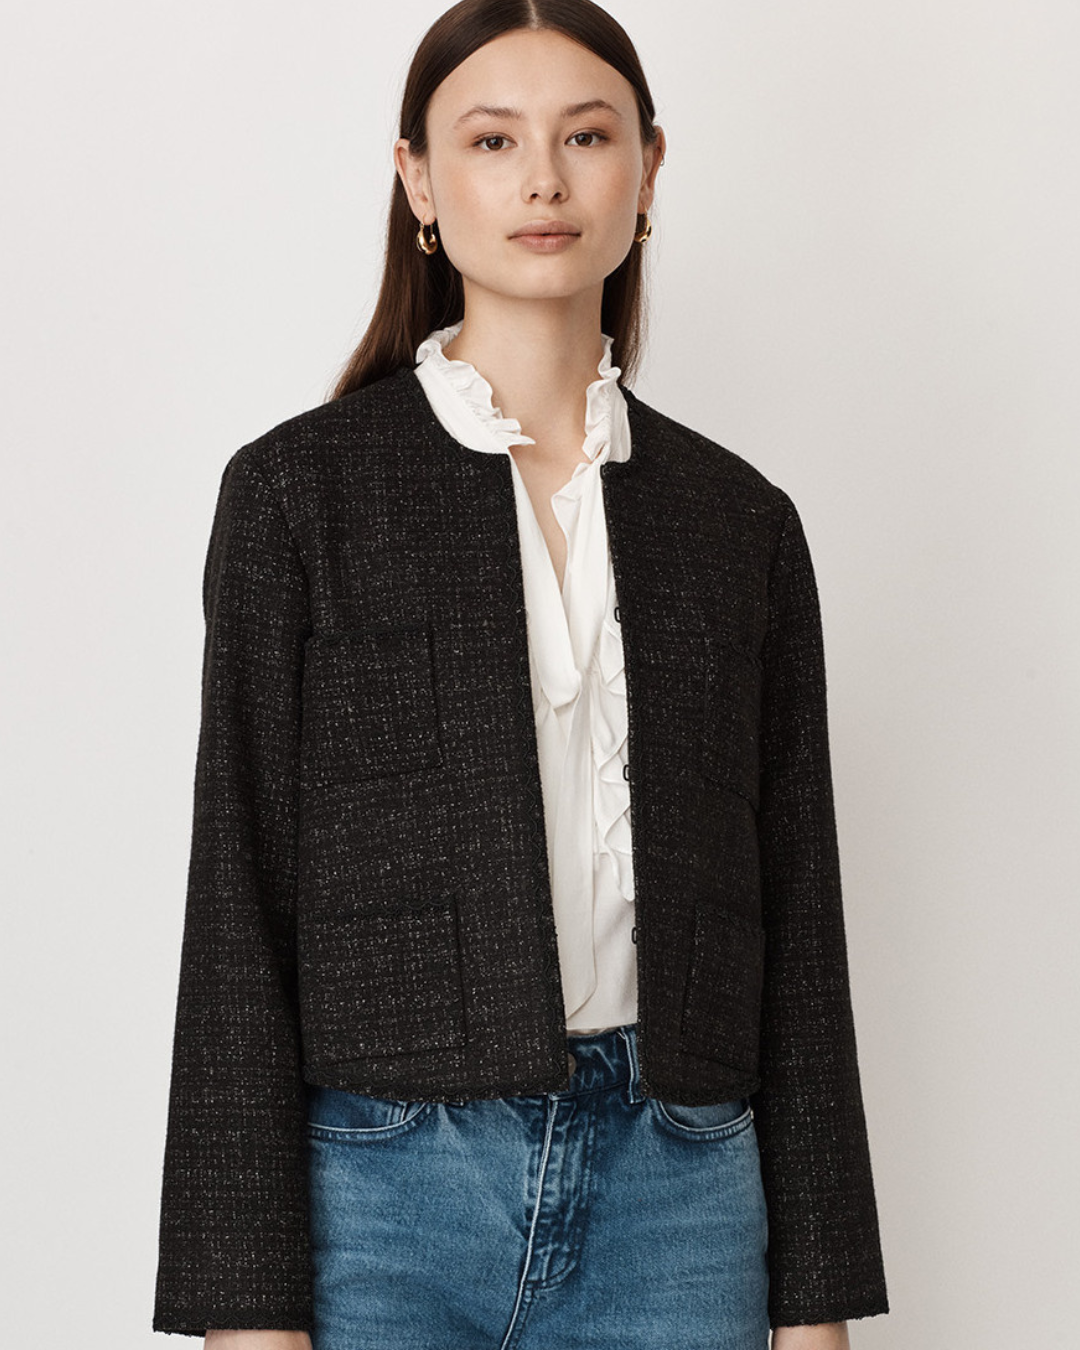 Black boxy smart cropped jacket with four patch pockets and hook and eye fastening to the neck with long sleeves and edge lace trim details.